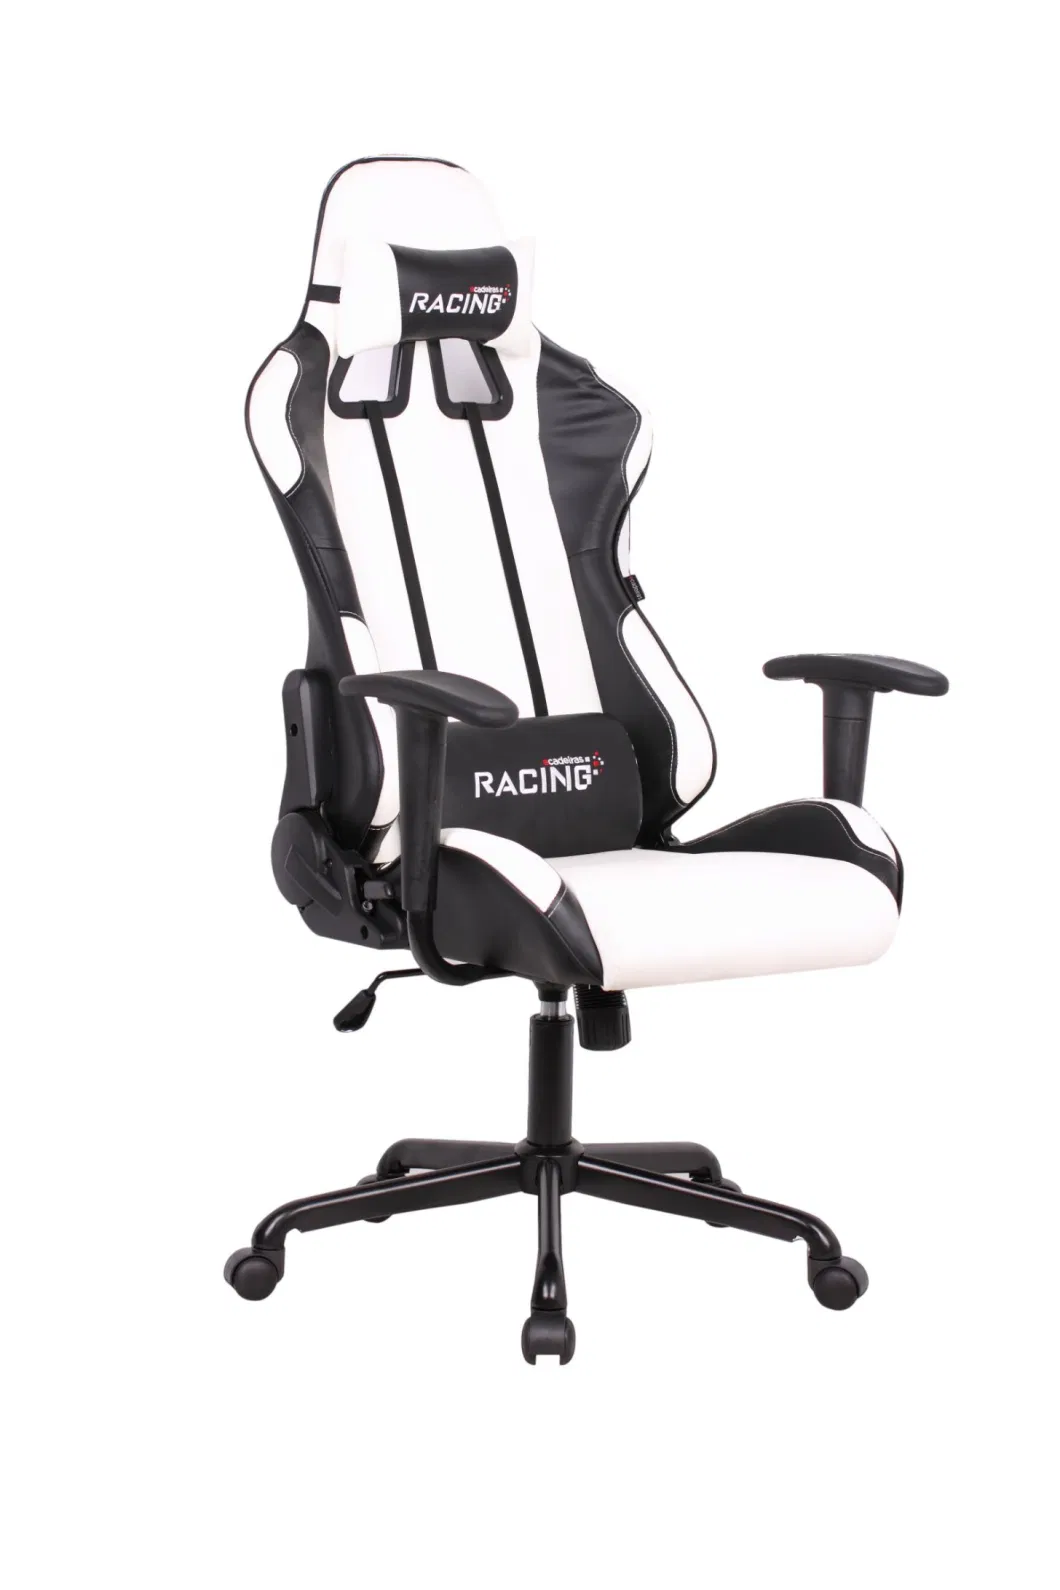 Sidanli Teen Video Game Chair, Video Gaming Chairs for Kids